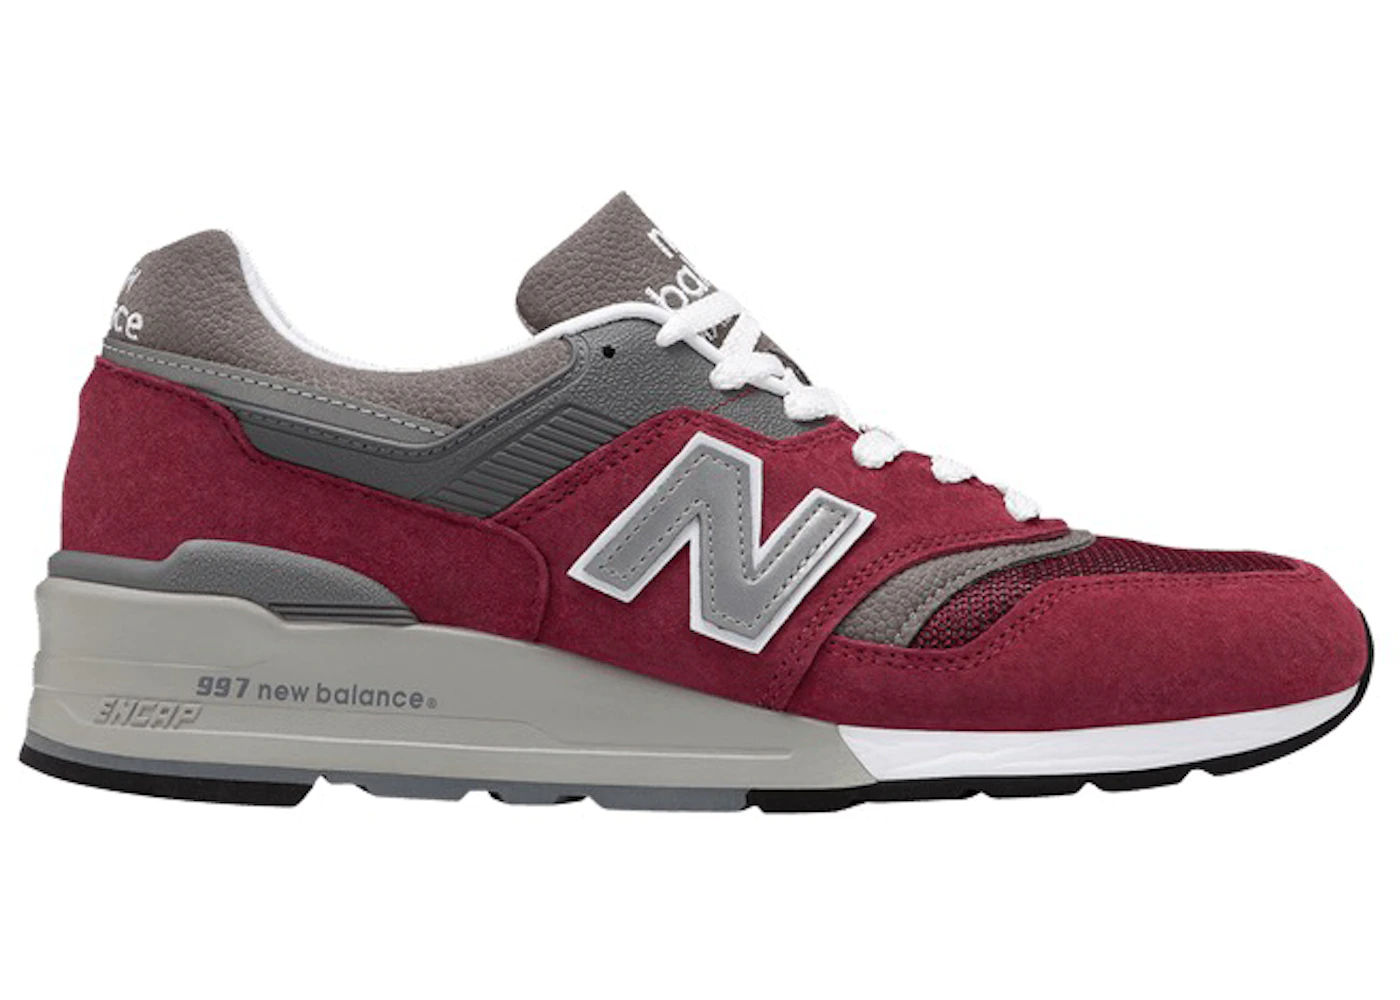 New Balance 997 Made in USA Burgundy Grey Men's Trainers - M997BR - GB